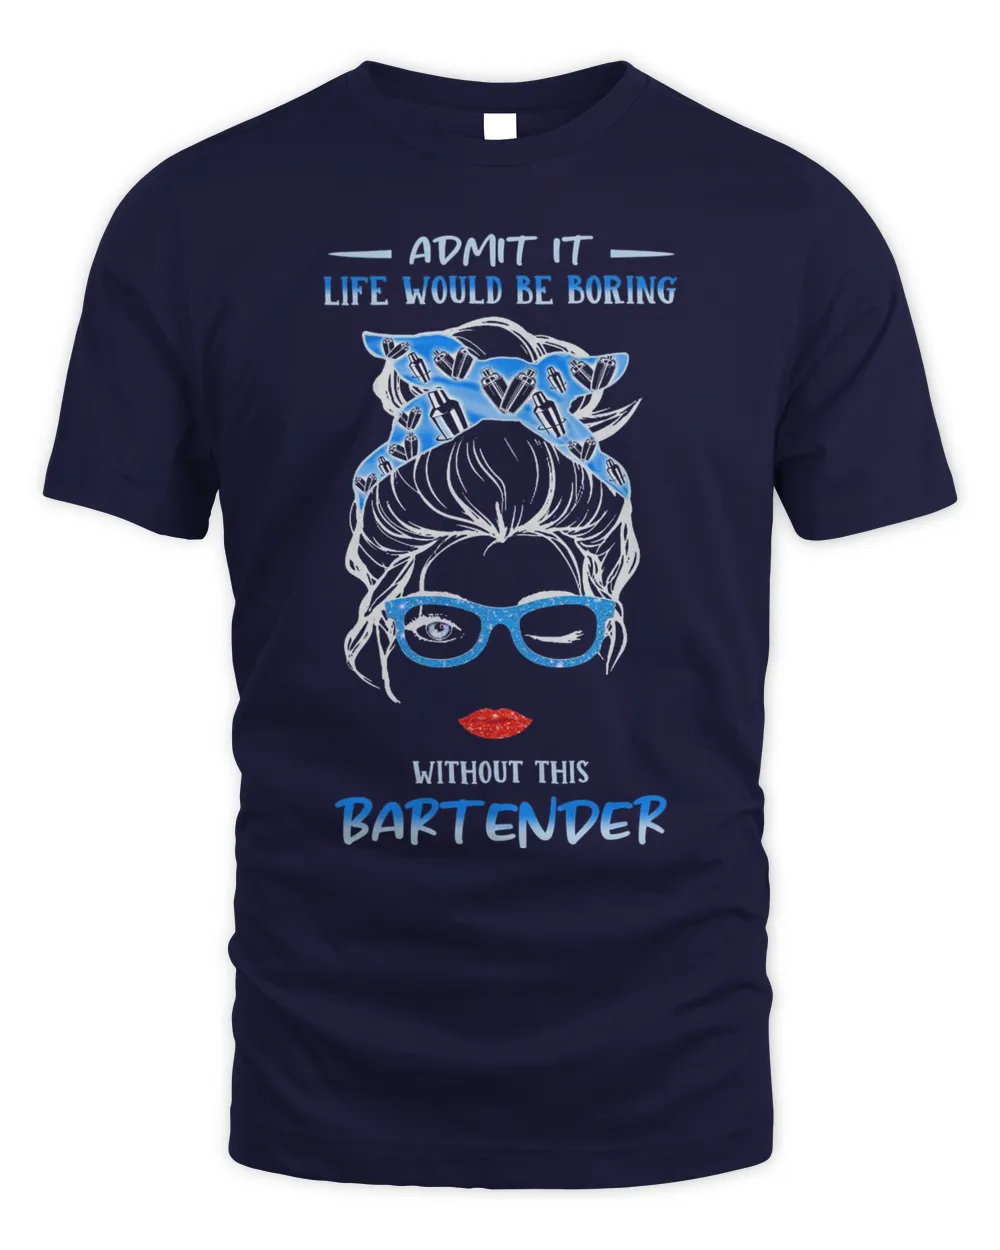 Messy Bun Girl Admit It Life Would Be Boring Without This Bartender Shirt